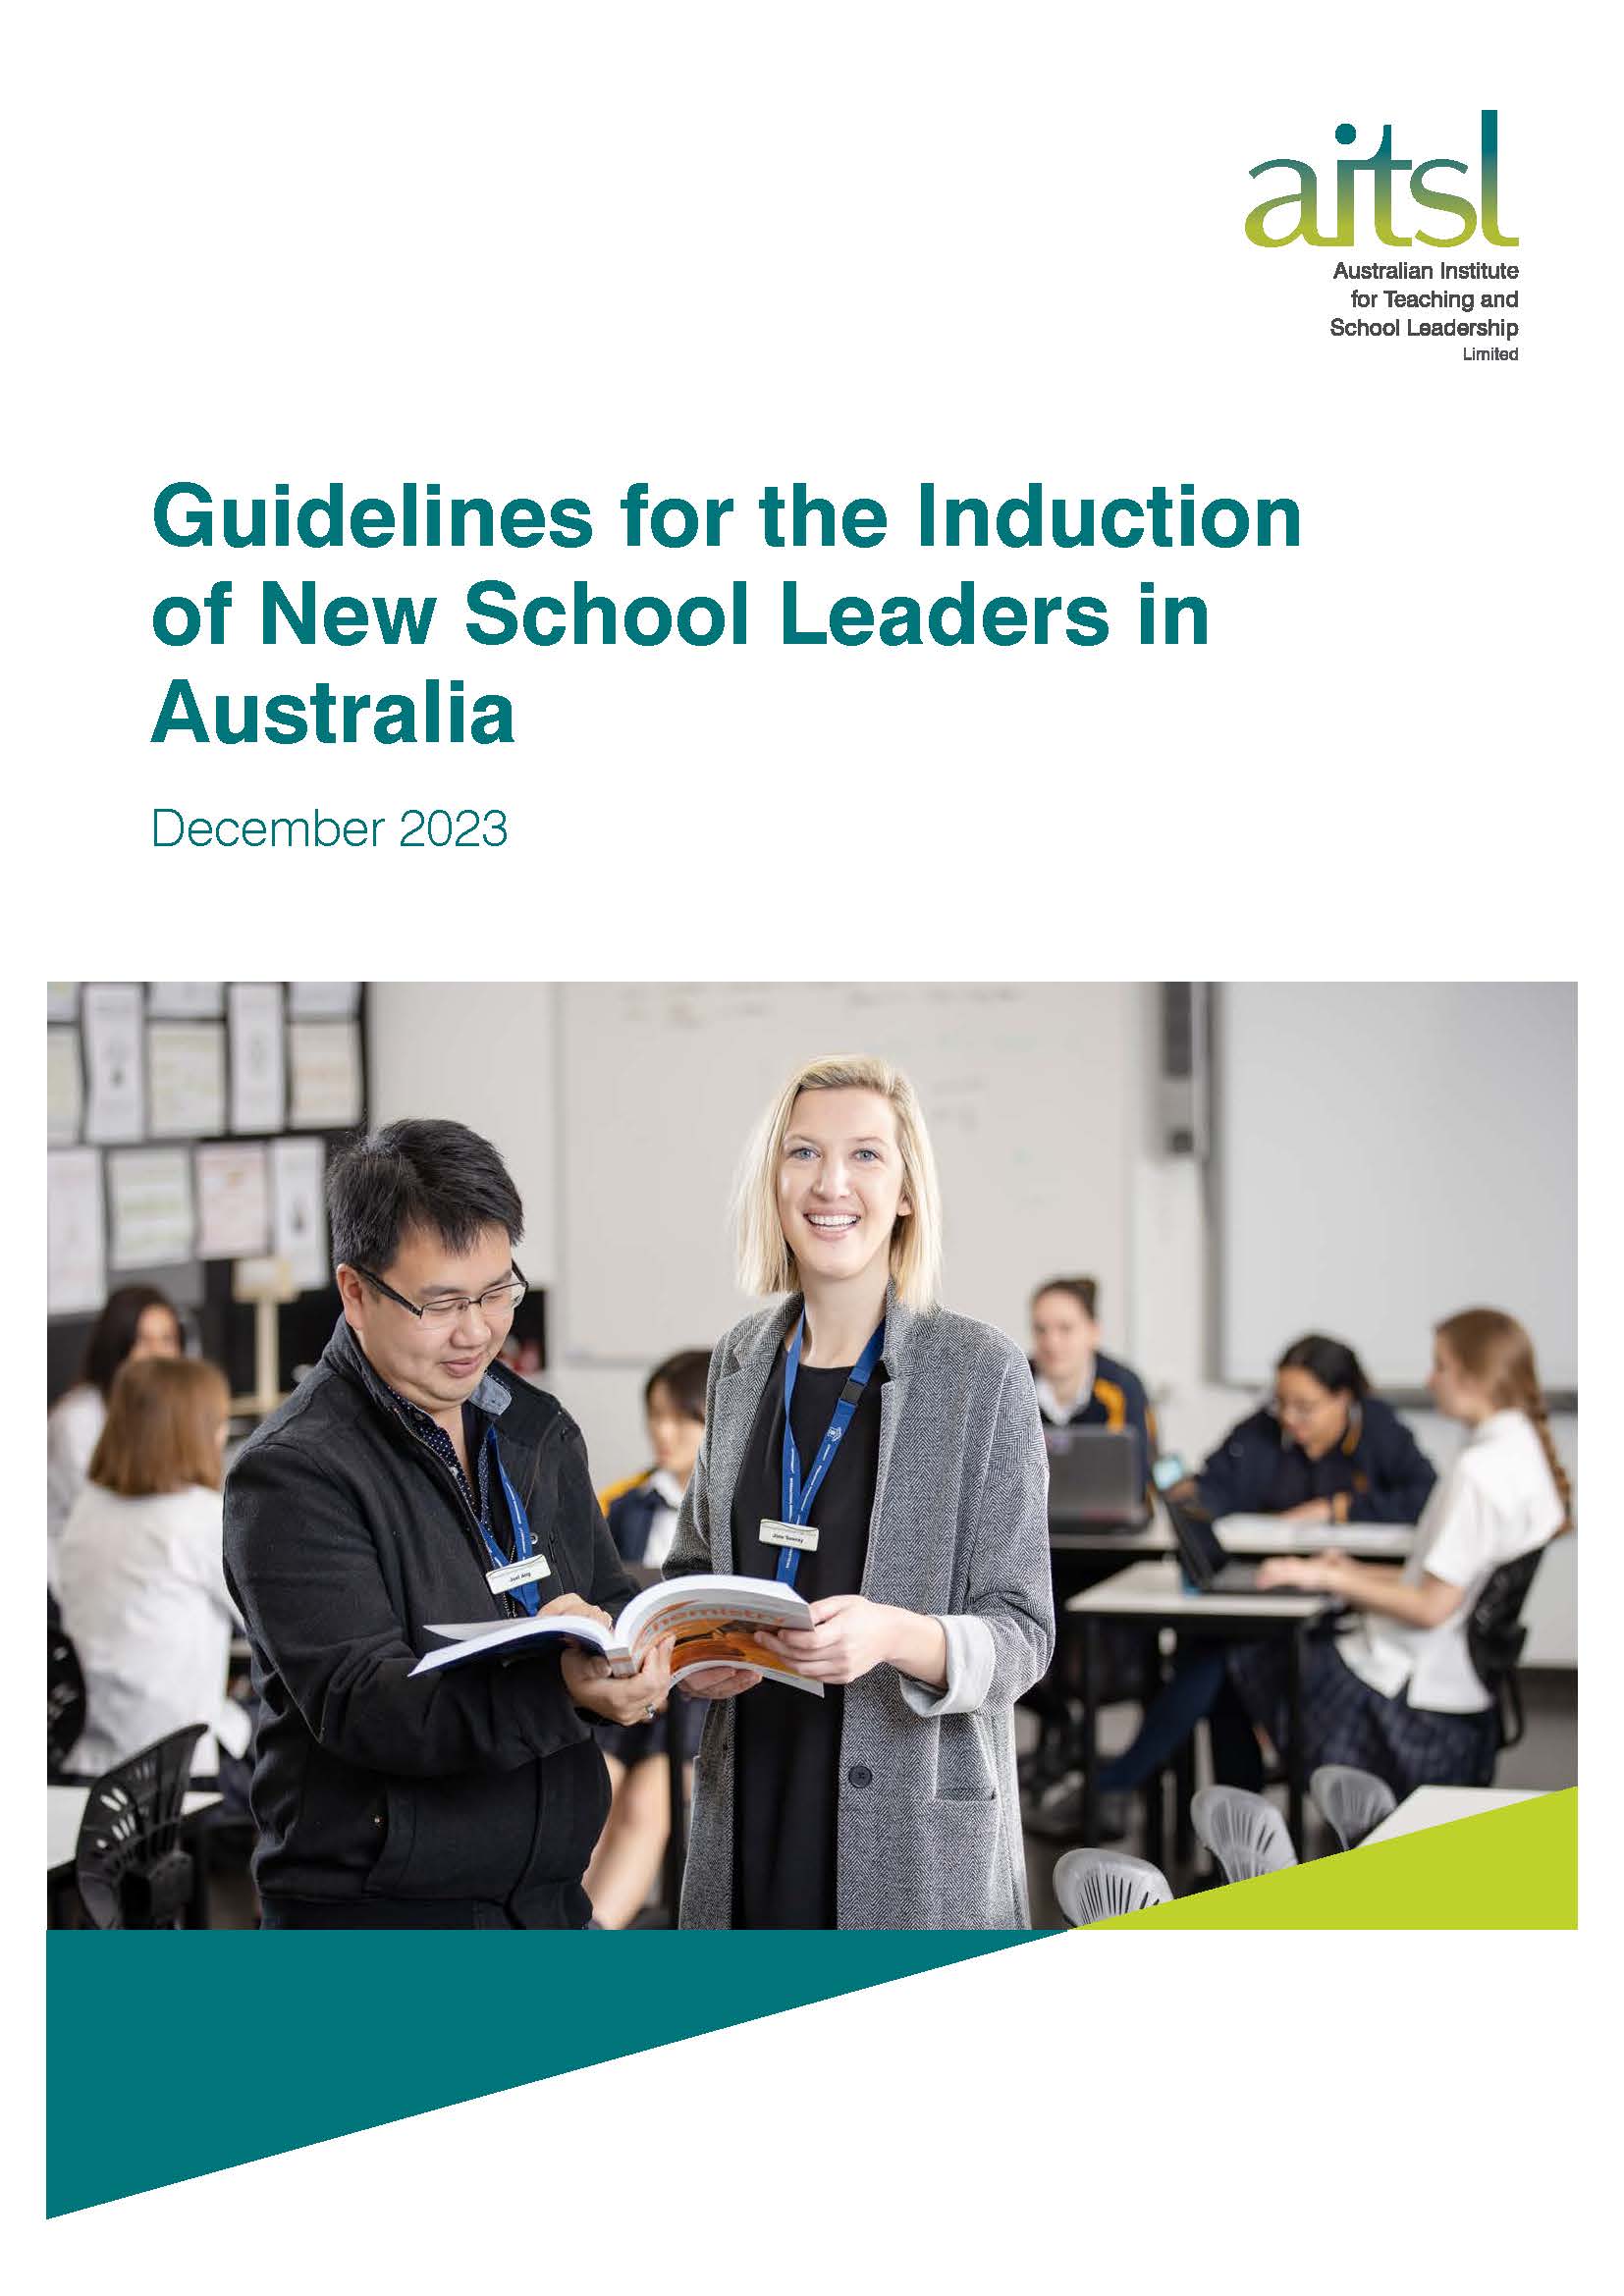 Guidelines for induction of new school leaders